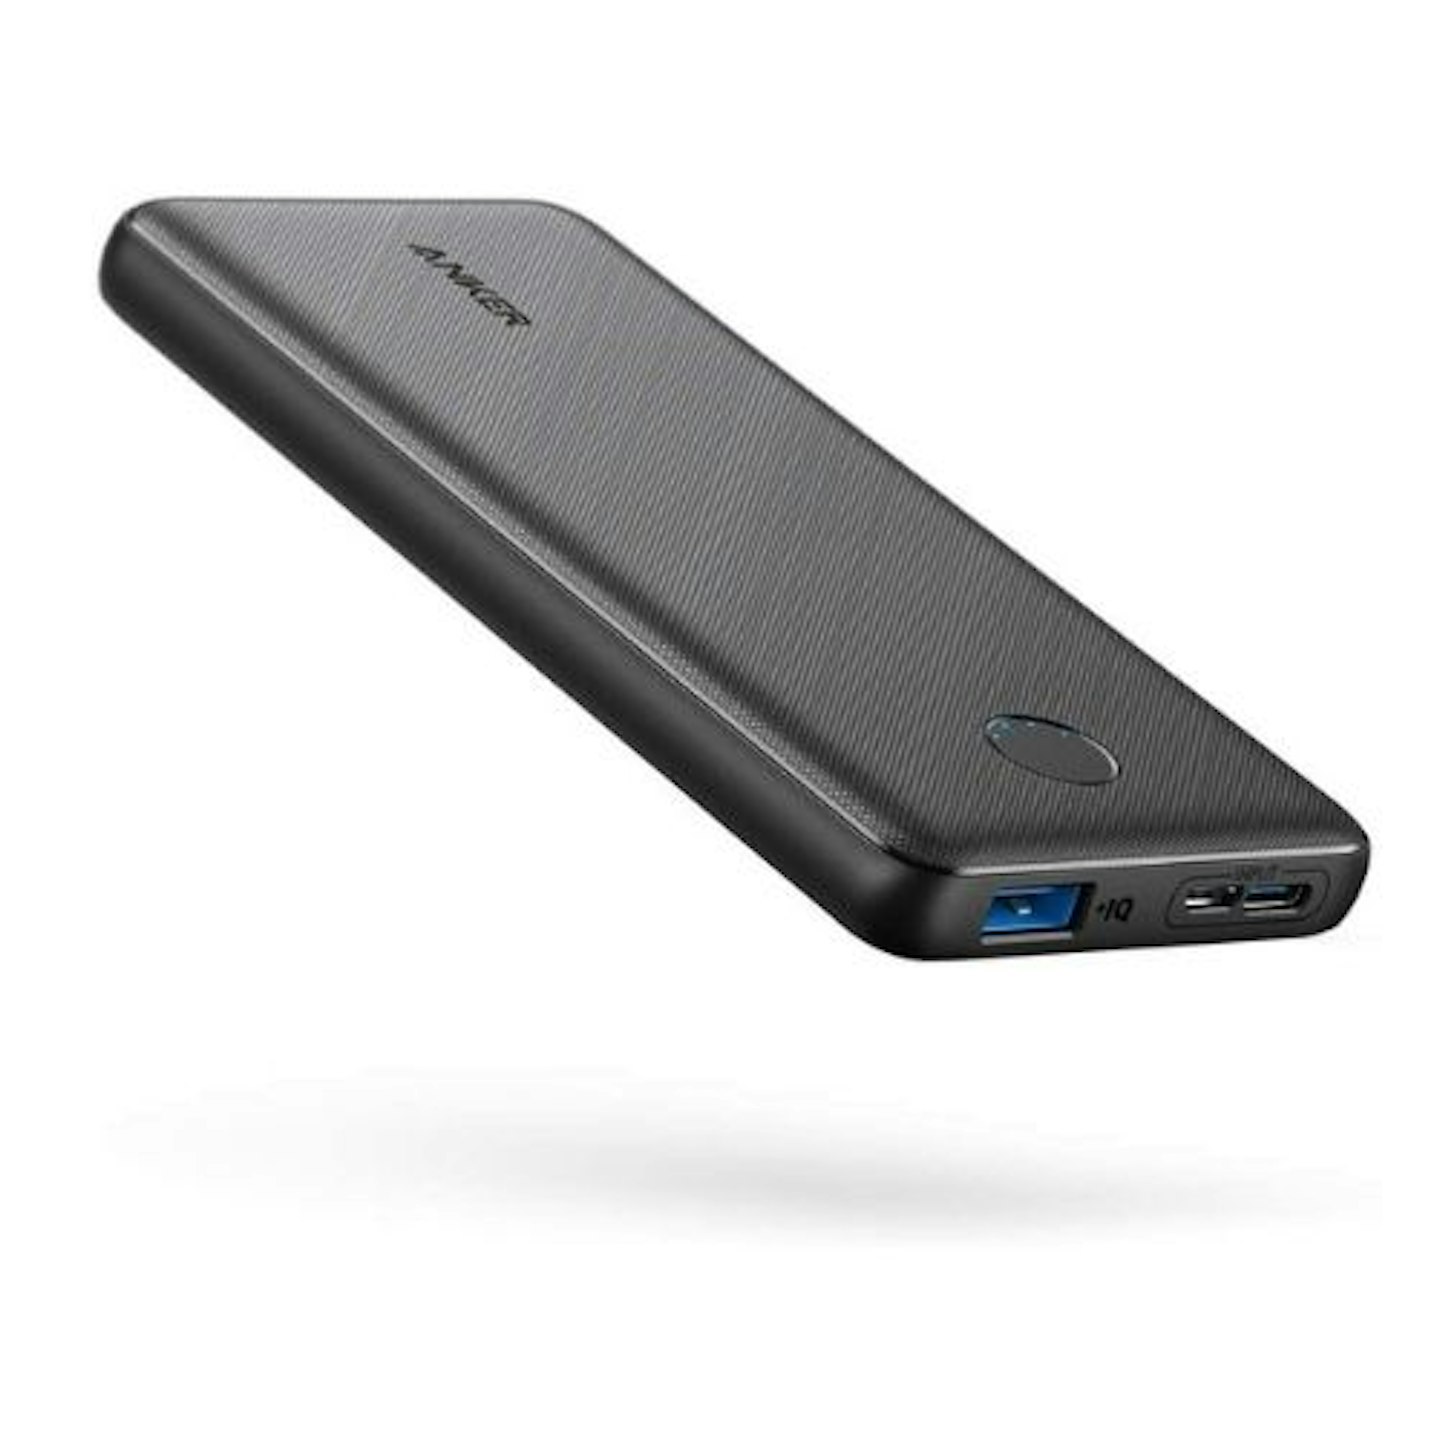 Anker Power Bank, PowerCore Slim 10000 Portable Charger